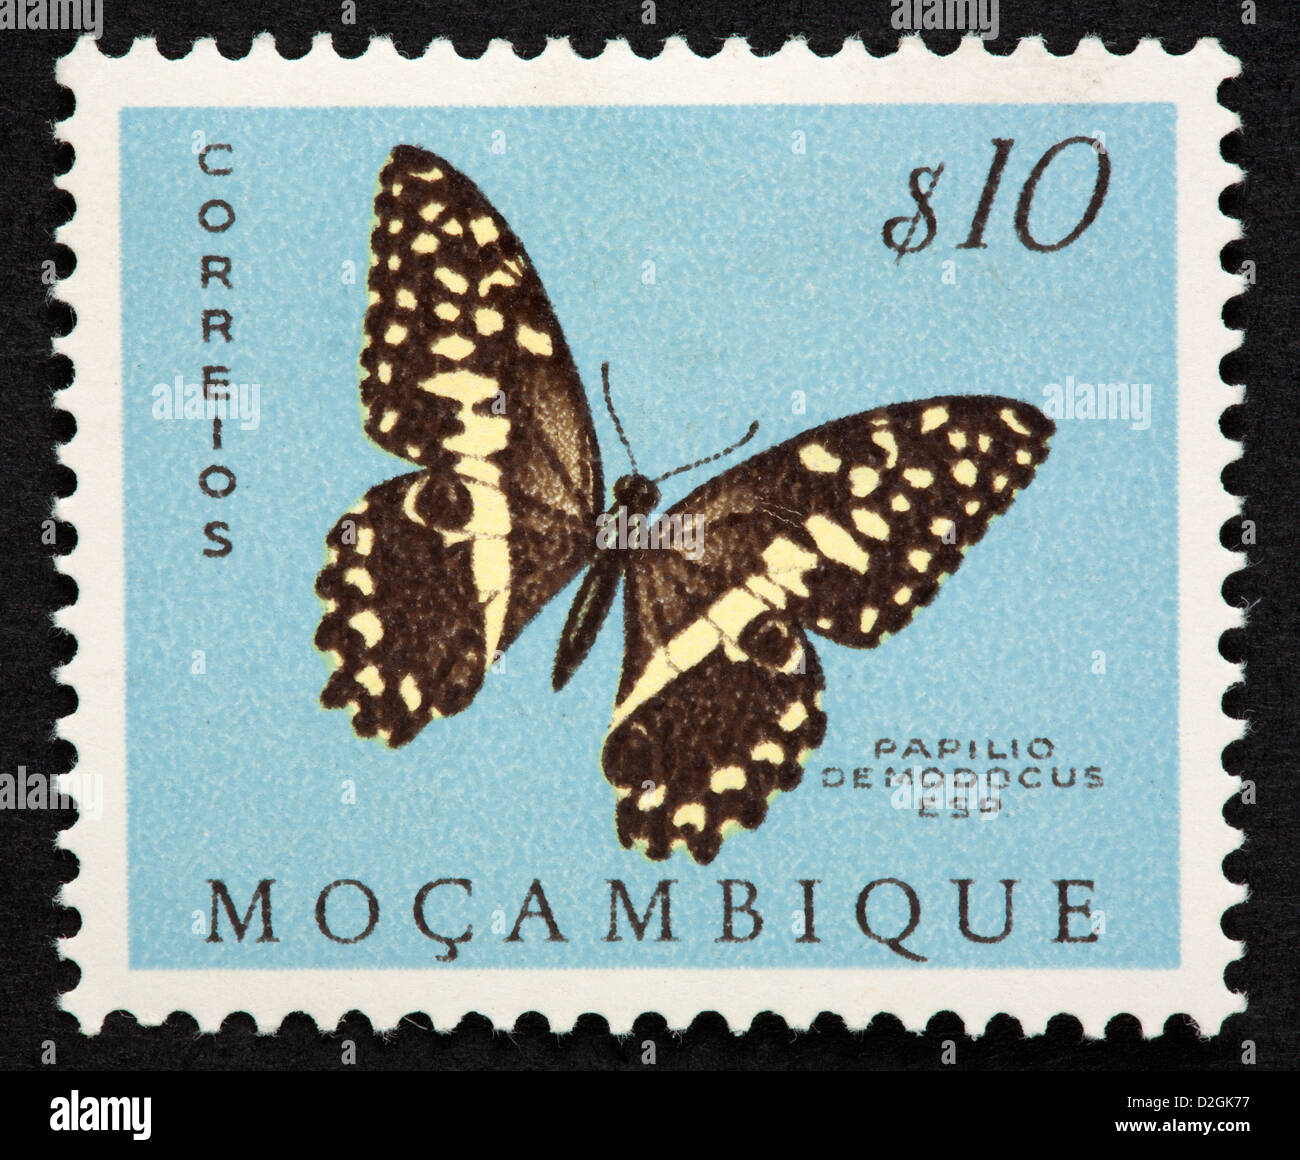 Mozambican postage stamp Stock Photo